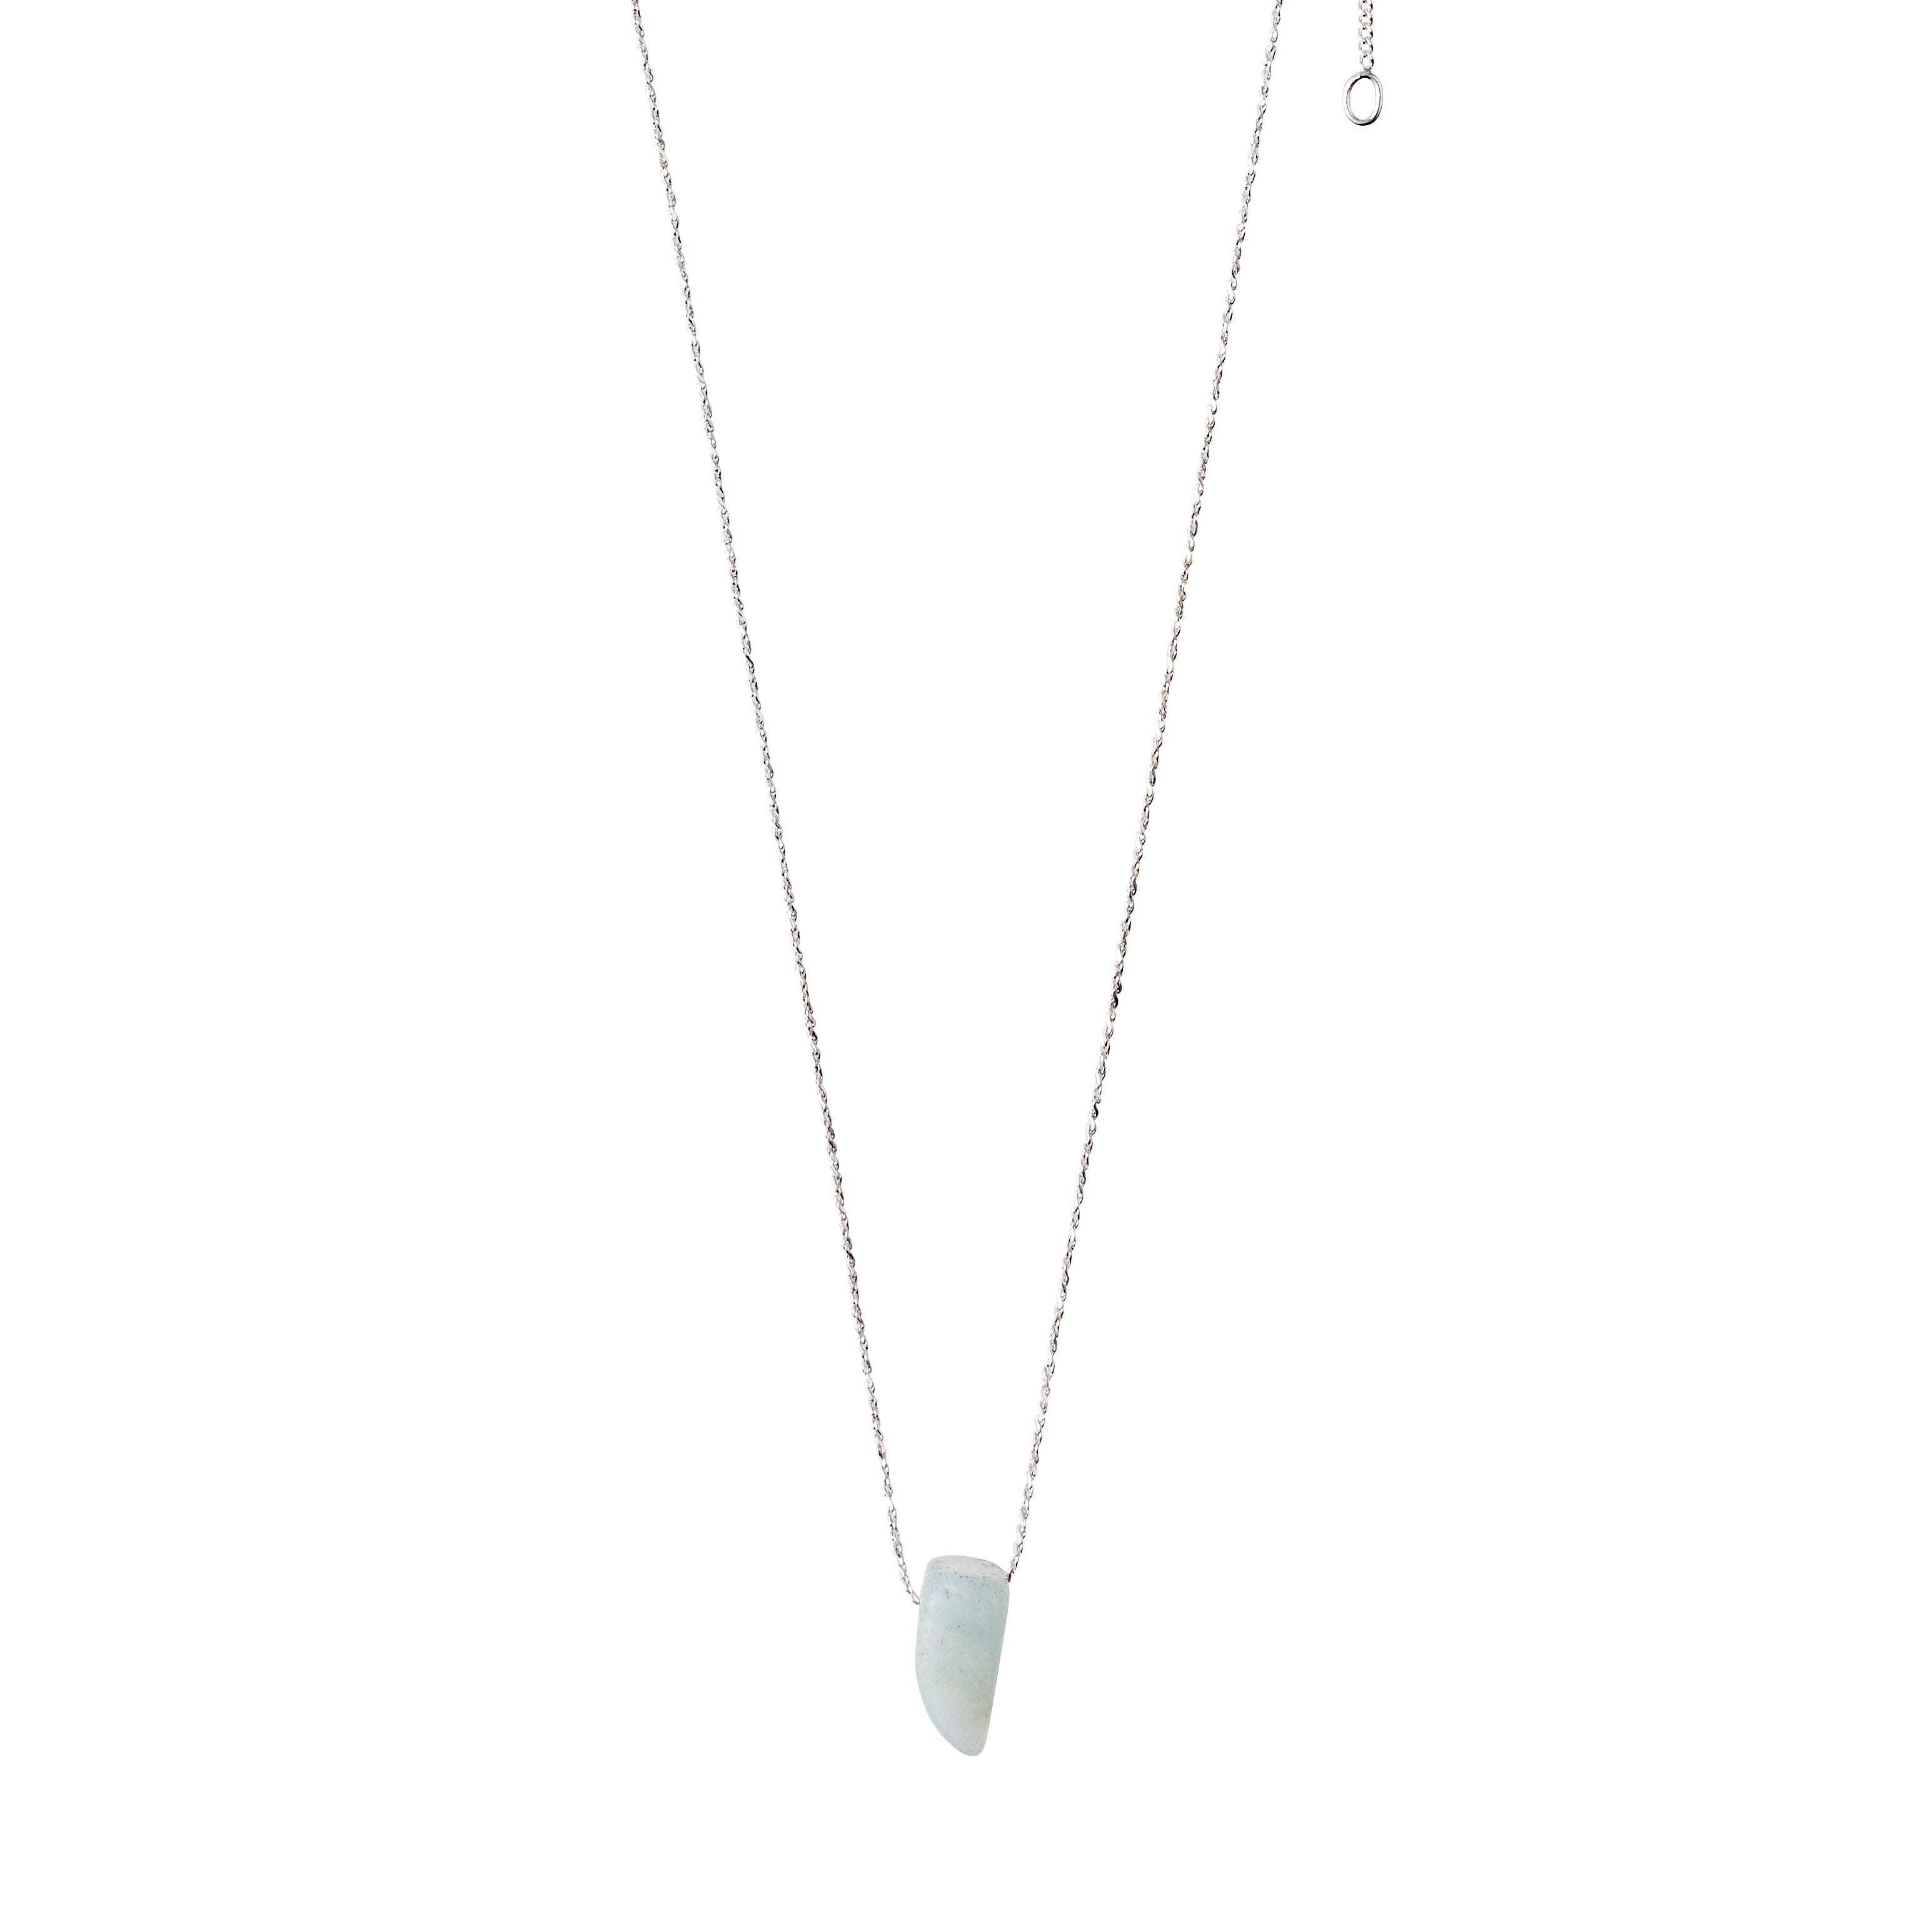 CHAKRA Amazonite necklace silver-plated